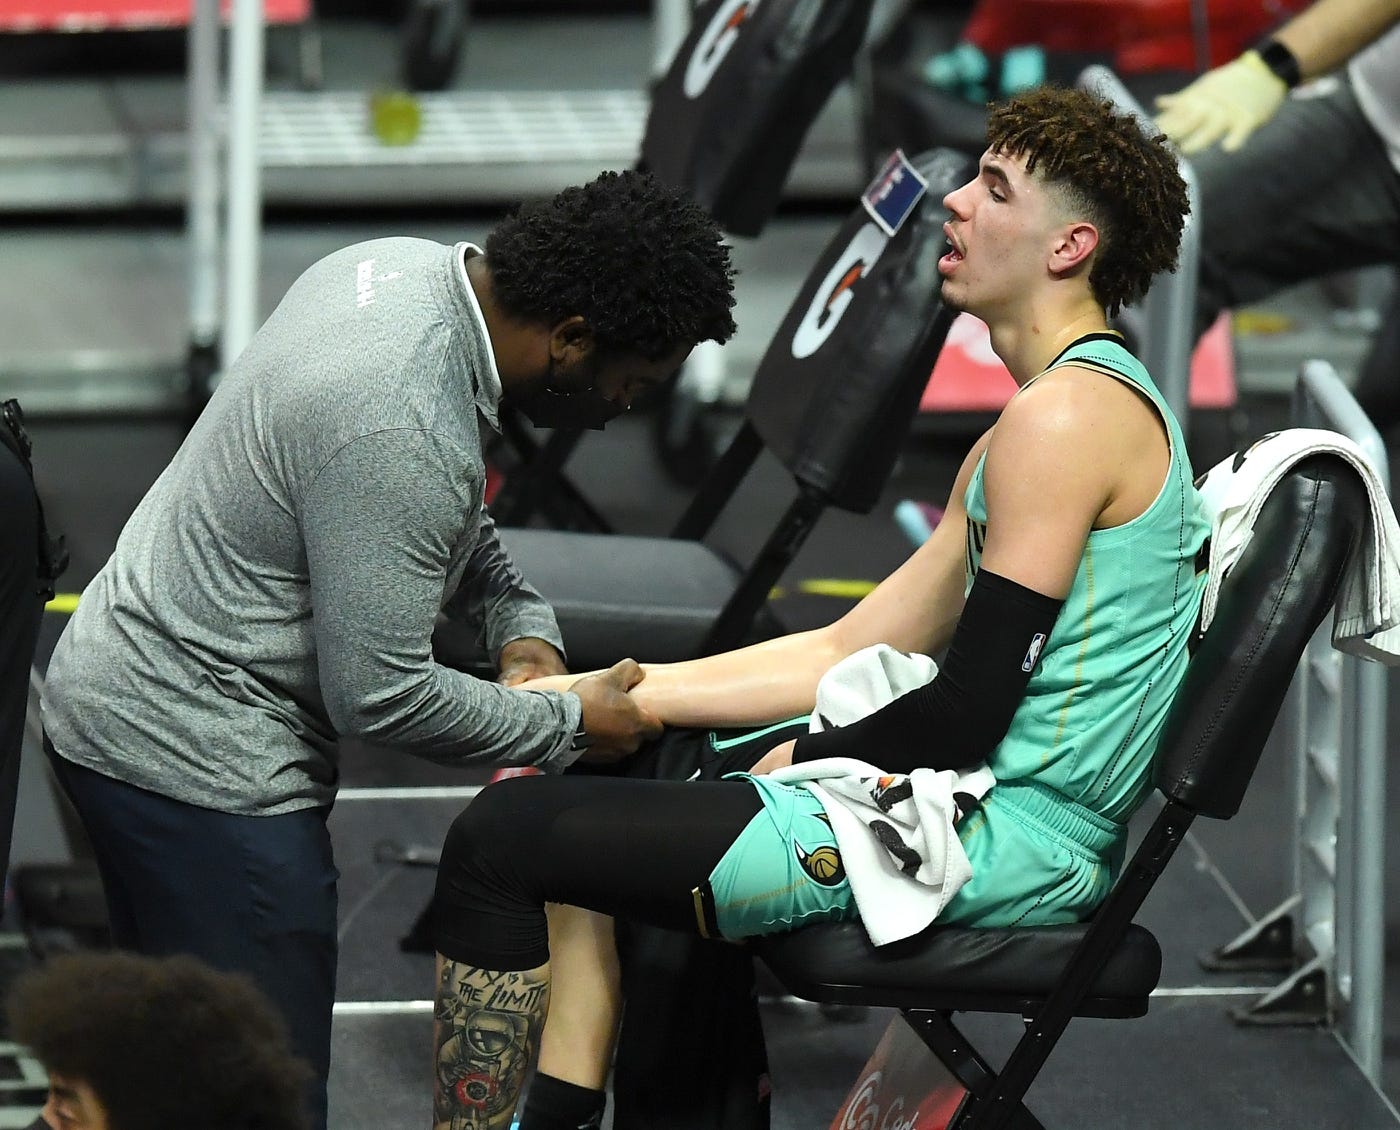 Mar 20, 2021; Los Angeles, California, USA; Charlotte Hornets team trainer checks the wrist of guard LaMelo Ball (2) in the second half of the game against the Los Angeles Clippers at Staples Center. 